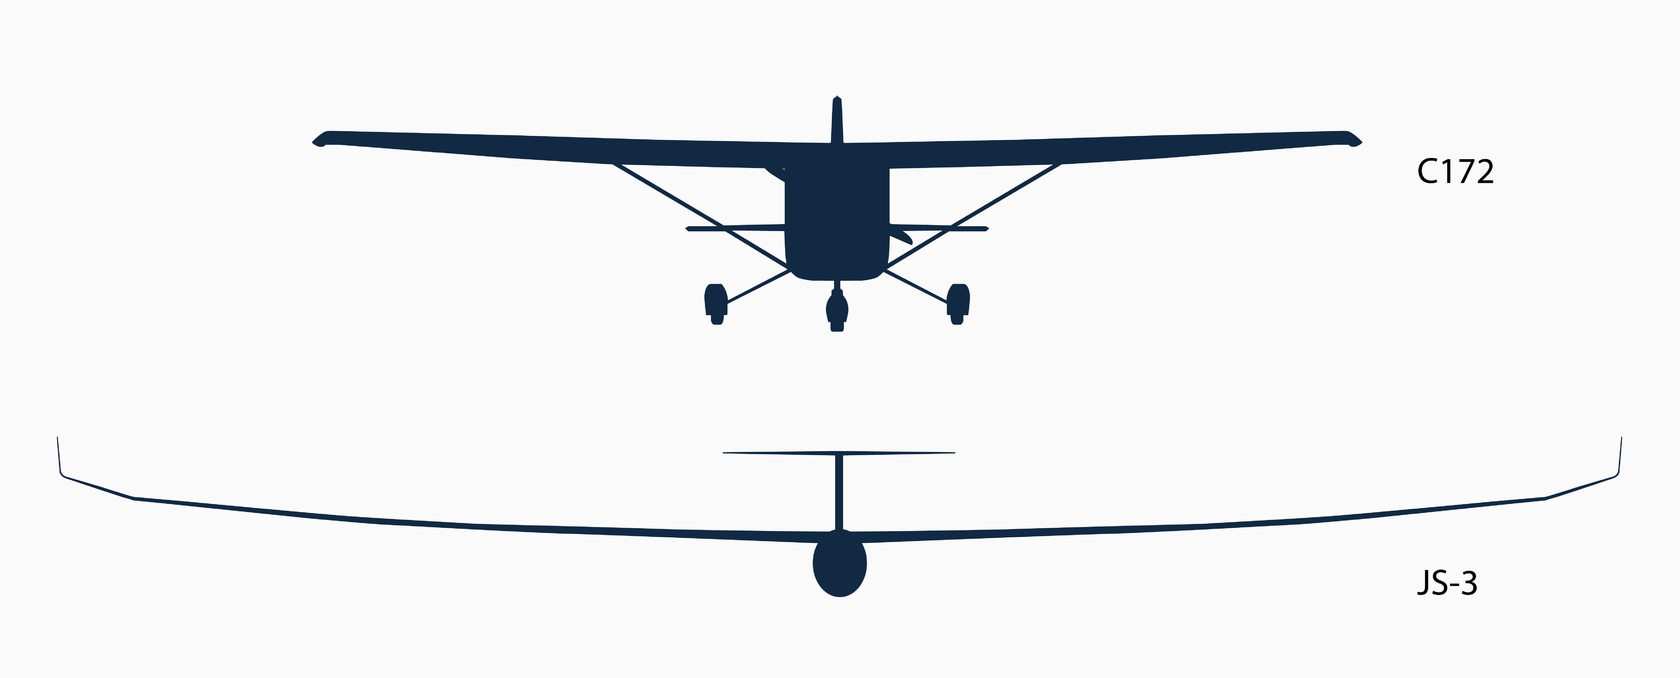 Frontal cross-sections of the Cessna 172 (top) compared to the Jonker JS3 Rapture (bottom).